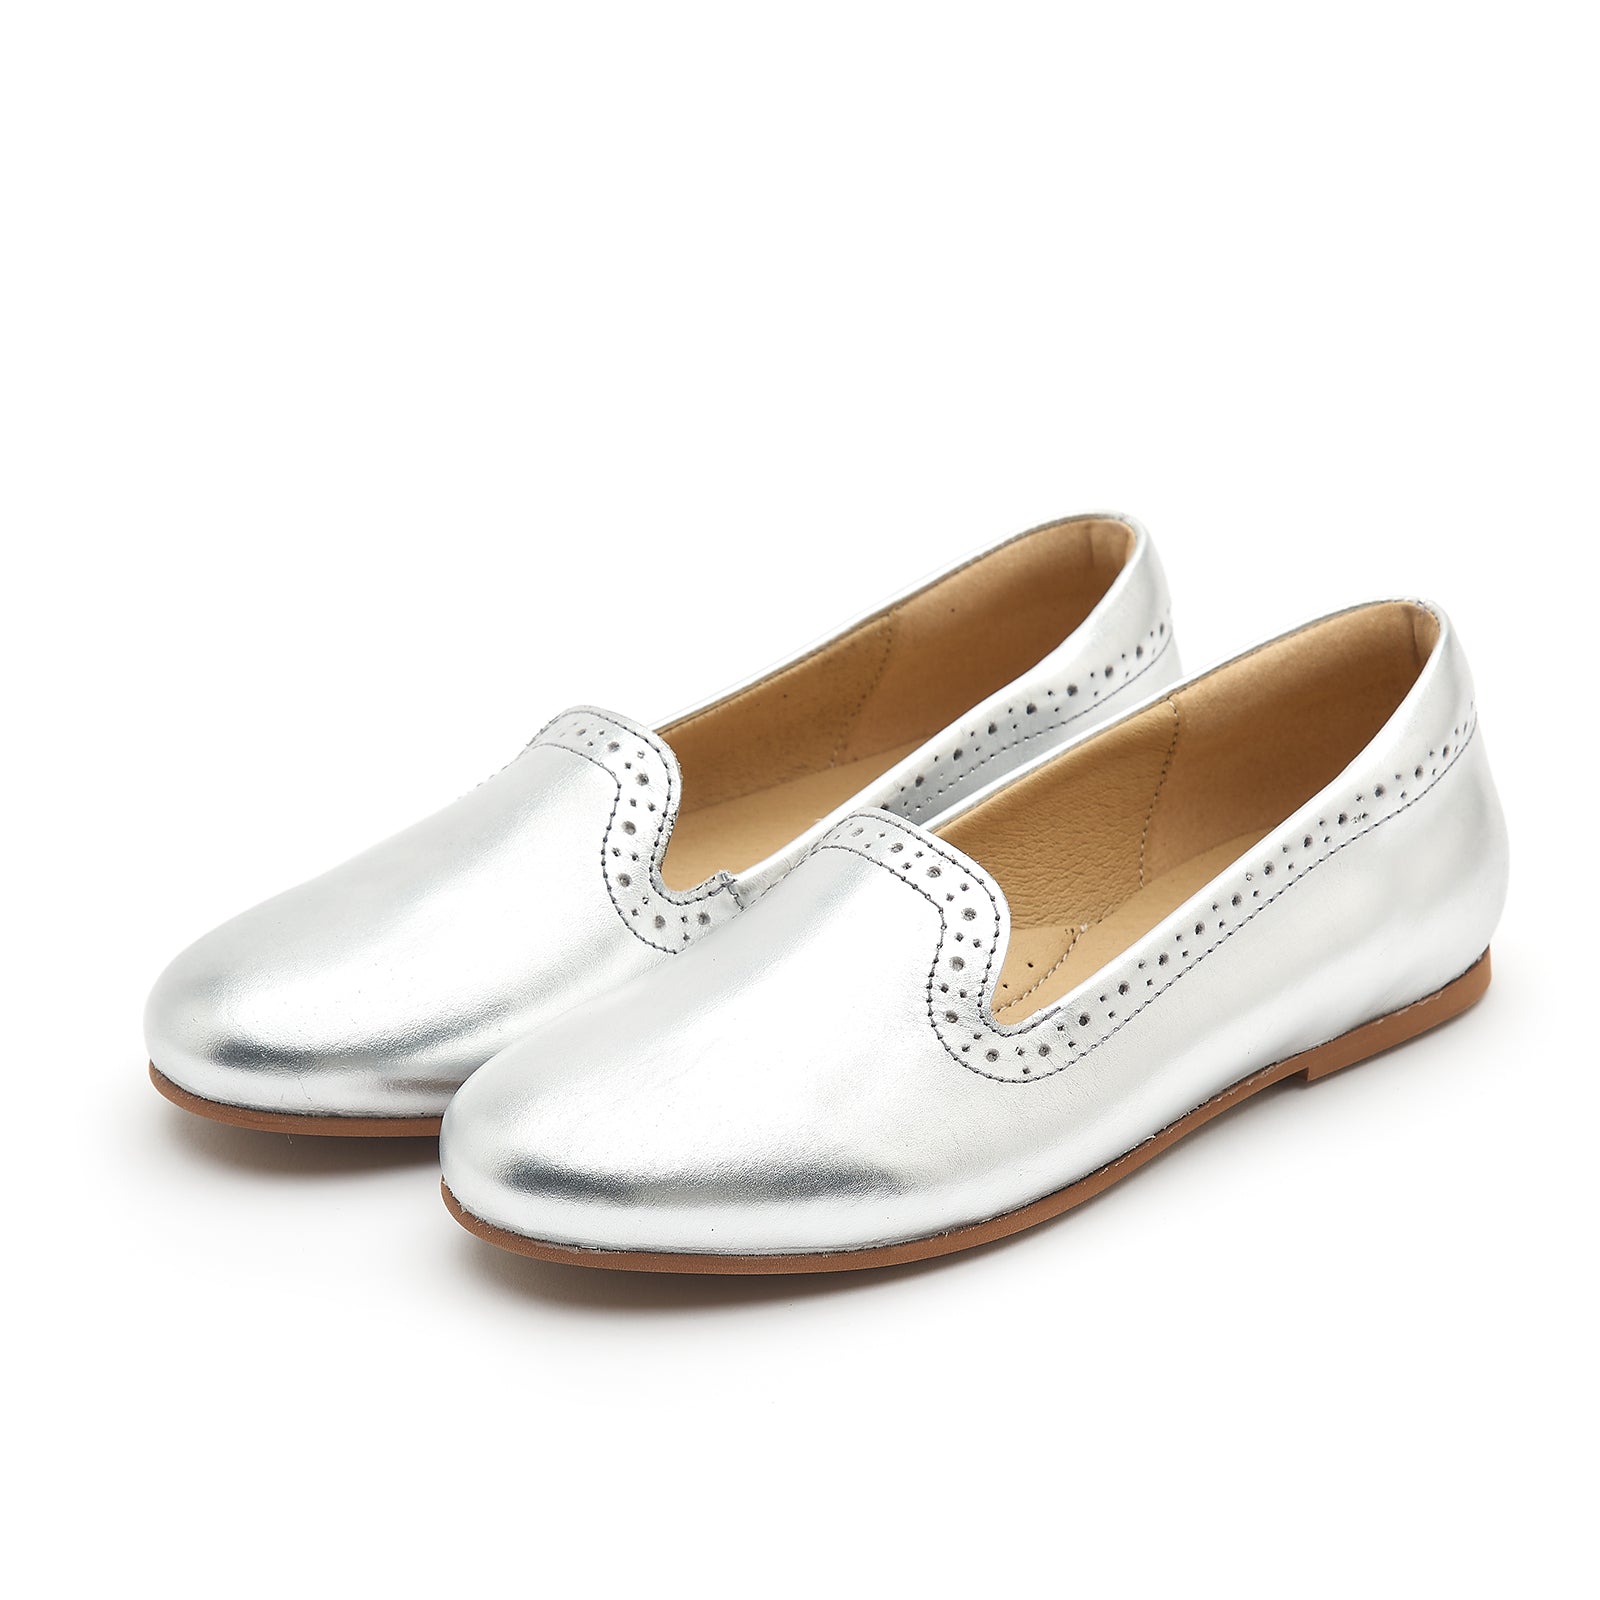 Young Soles Sindy Silver Leather Slipper Shoes